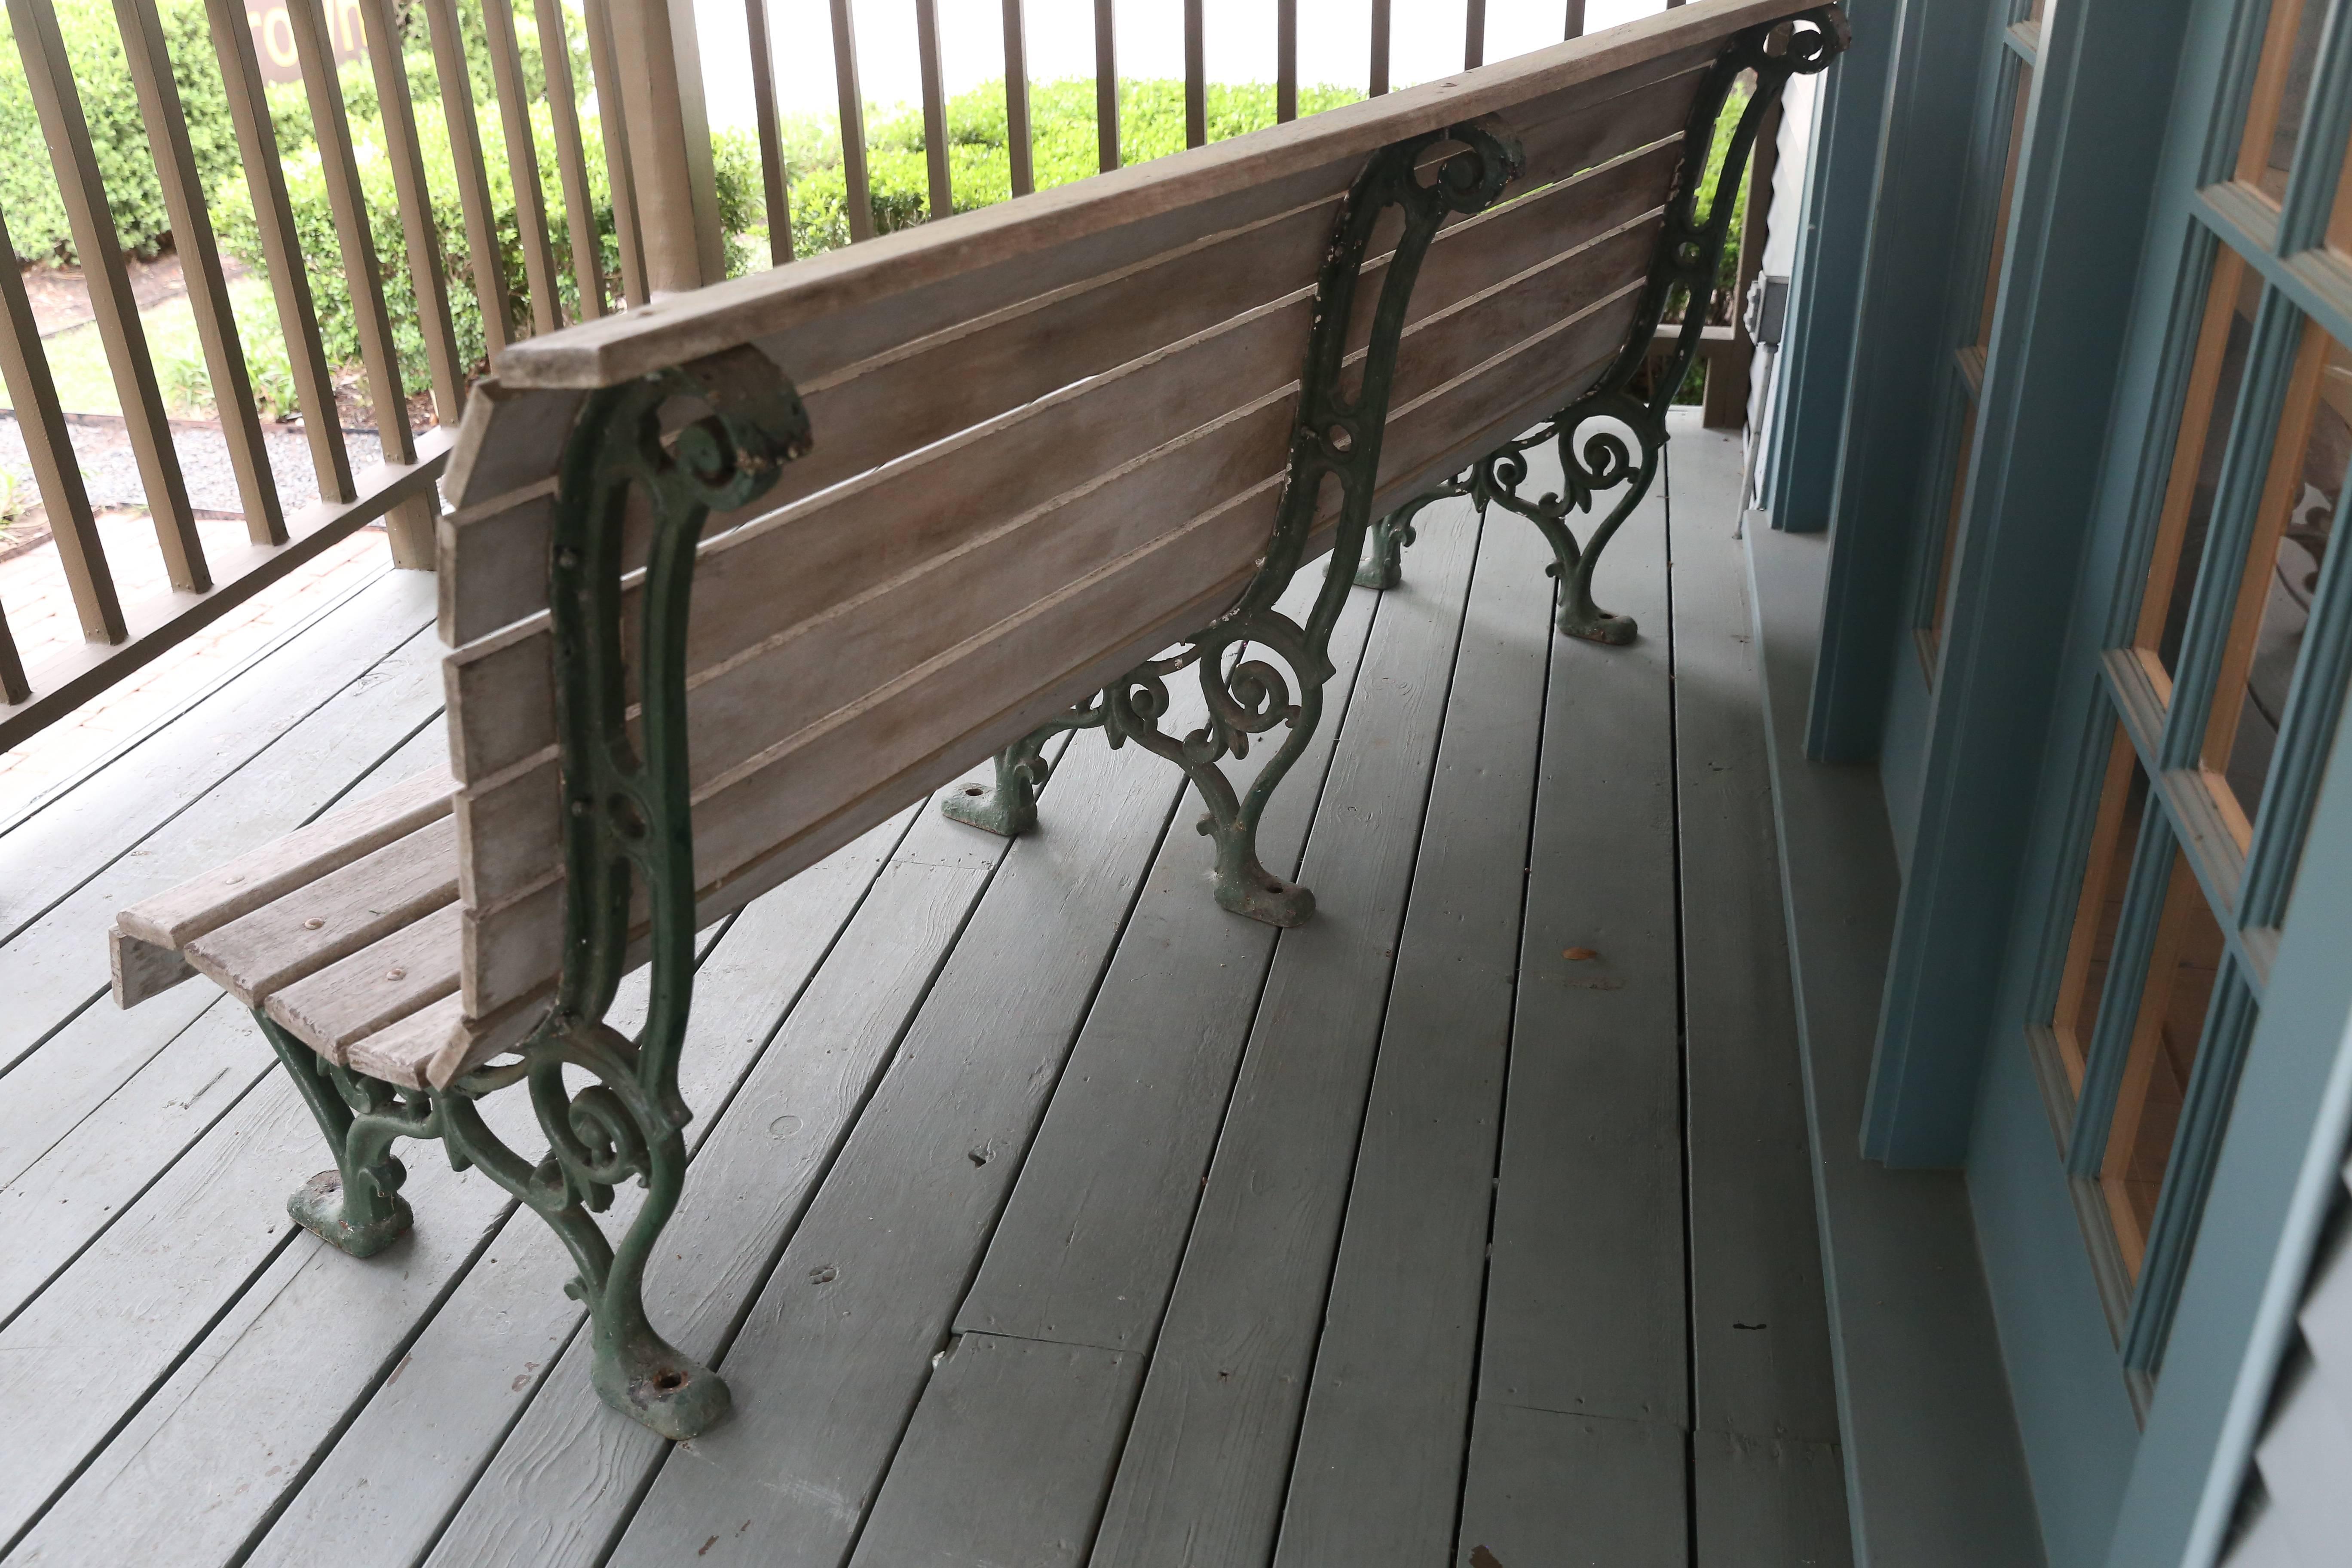 Large antique park bench from Belgium, circa 1910. Light colored curved wood slats, painted light grey, with enamel painted green iron legs and frame. Pretty decorative iron scroll work on the legs and back supports. Sturdy, heavy and comfortable.